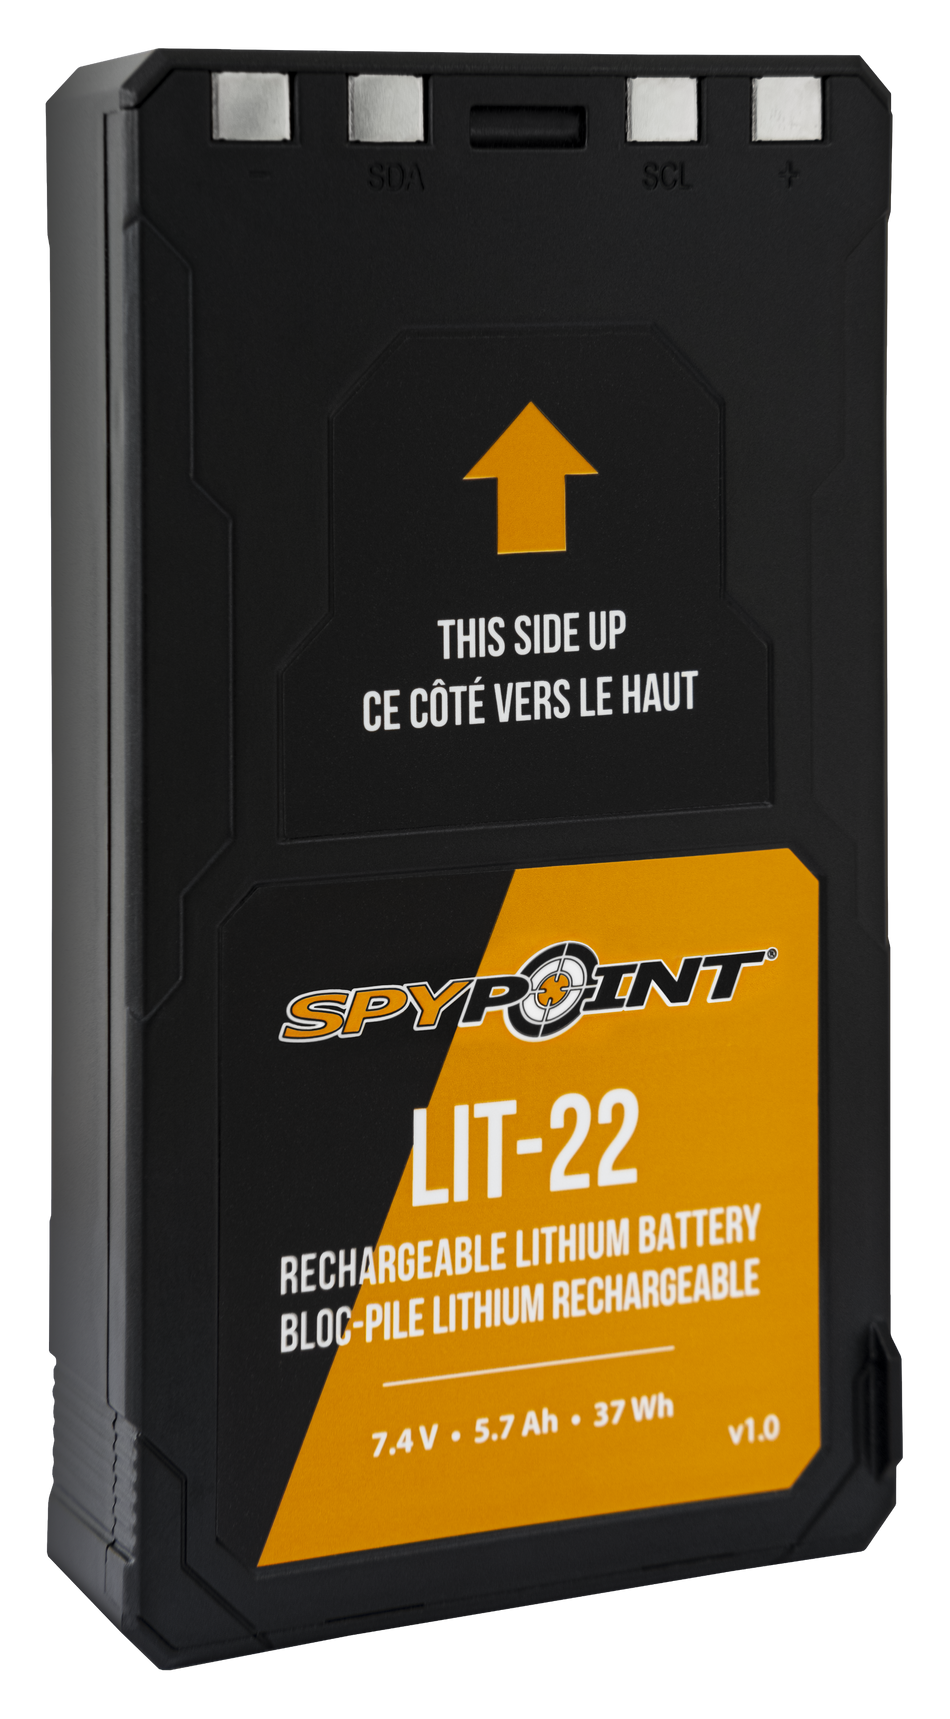 Spypoint Rechargeable Lithium Battery Pack Lit - 22 LIT22